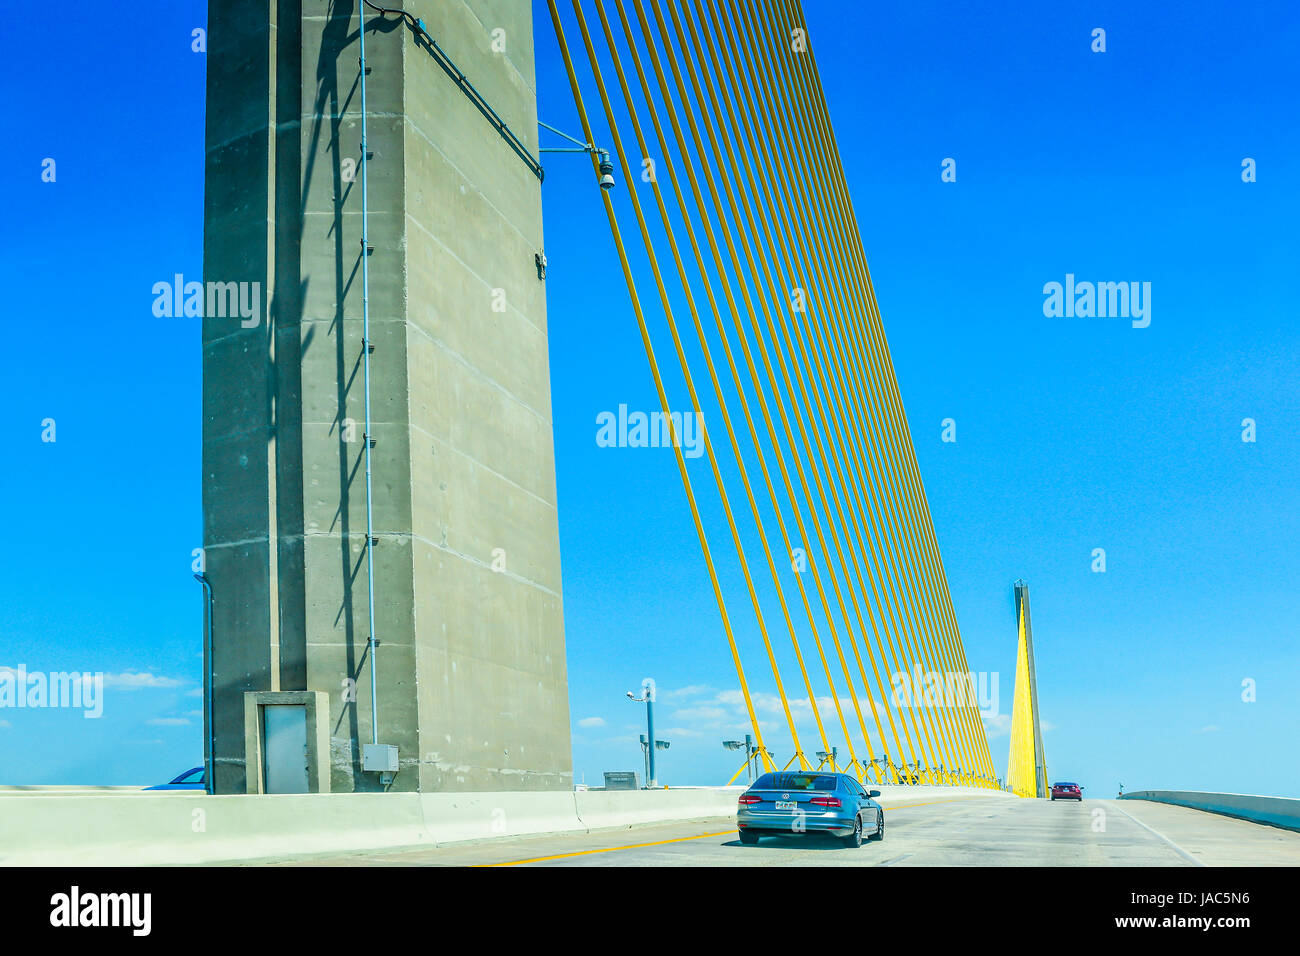 The Sunshine Skyway Bridge built over Tampa Bay is a cable stayed bridge with visually exciting yellow cables construction near St. Petersburg, FL Stock Photo